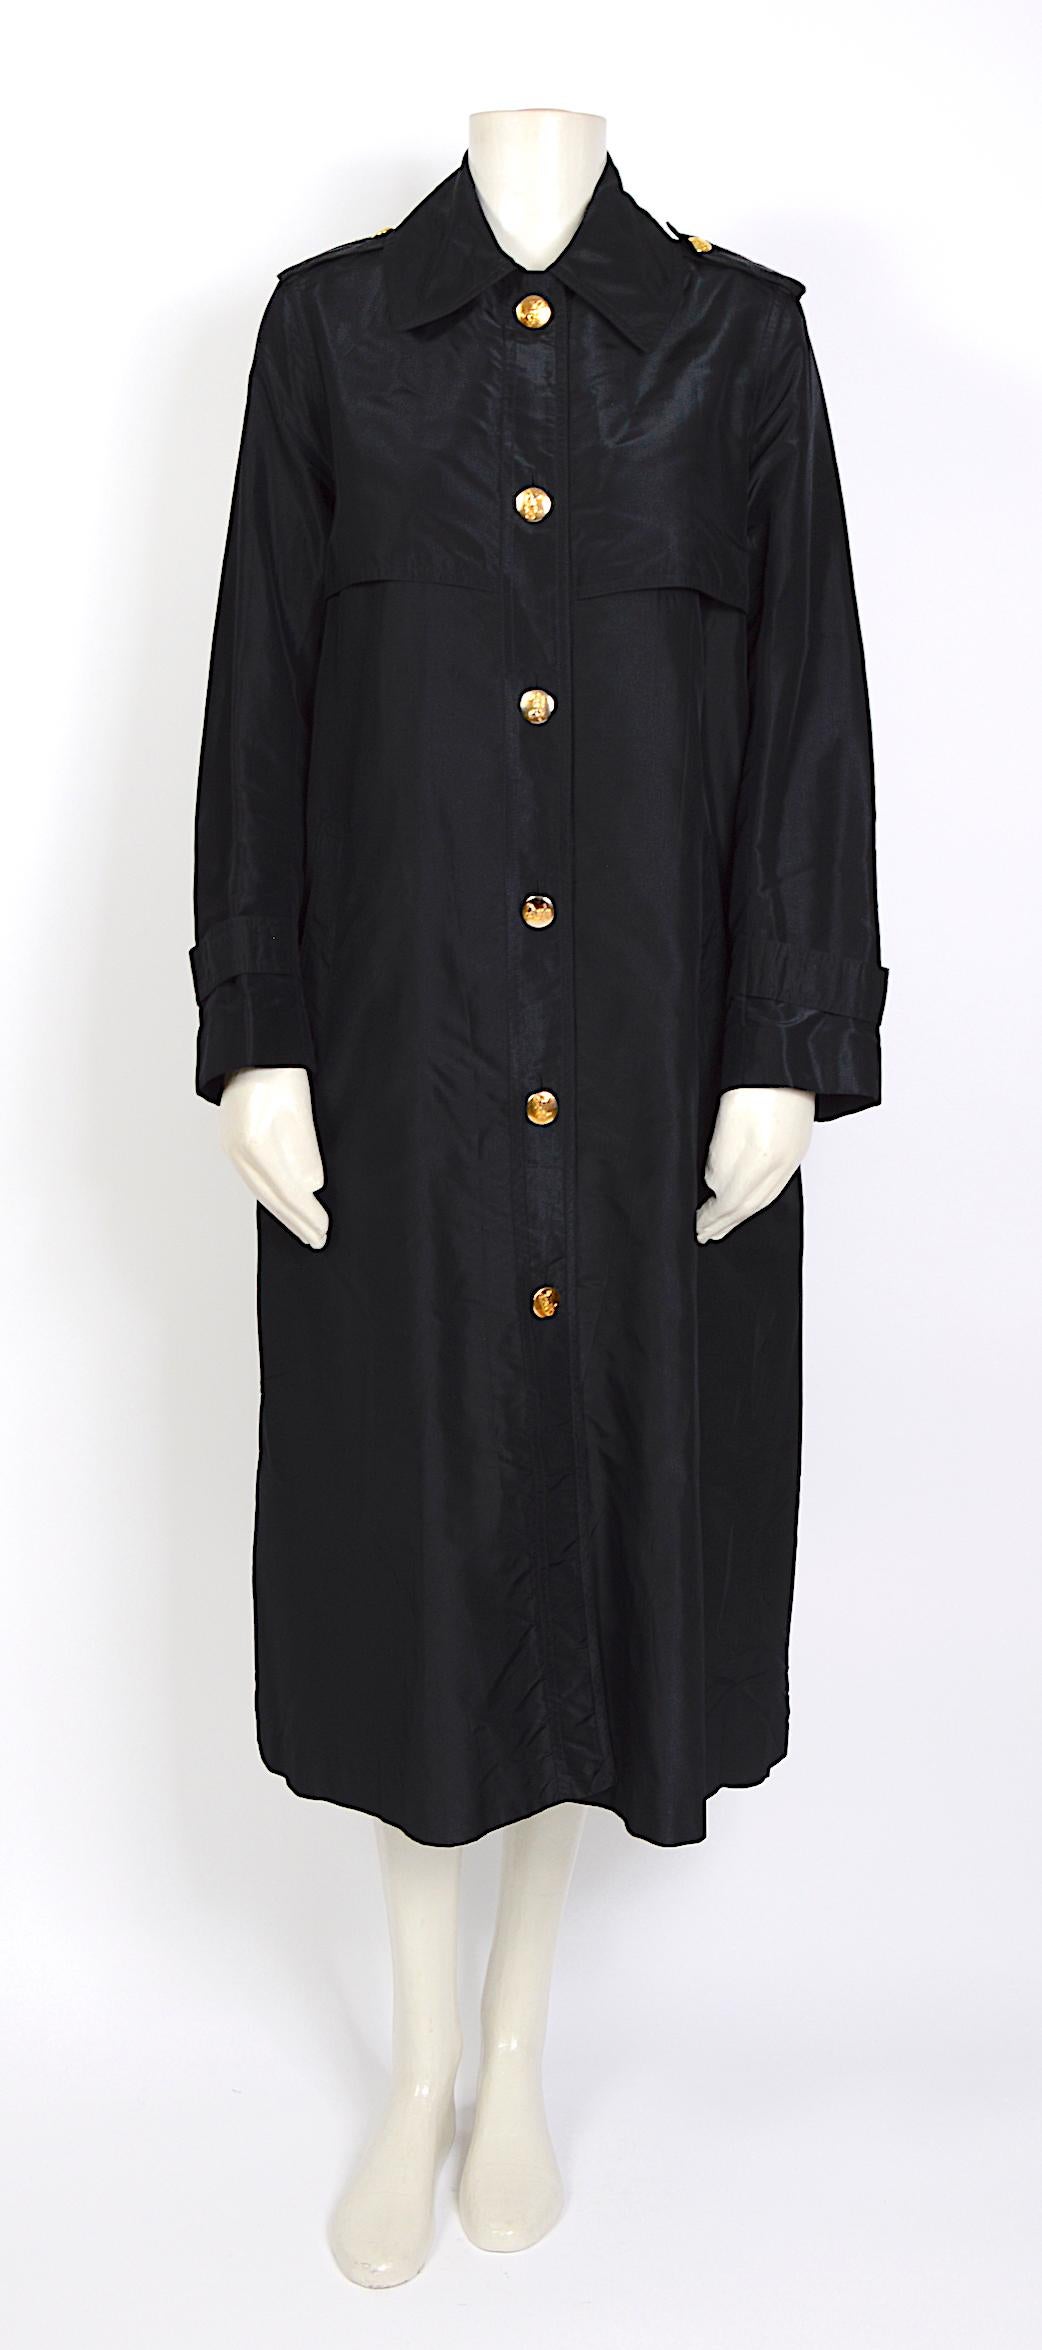 black coat with gold buttons